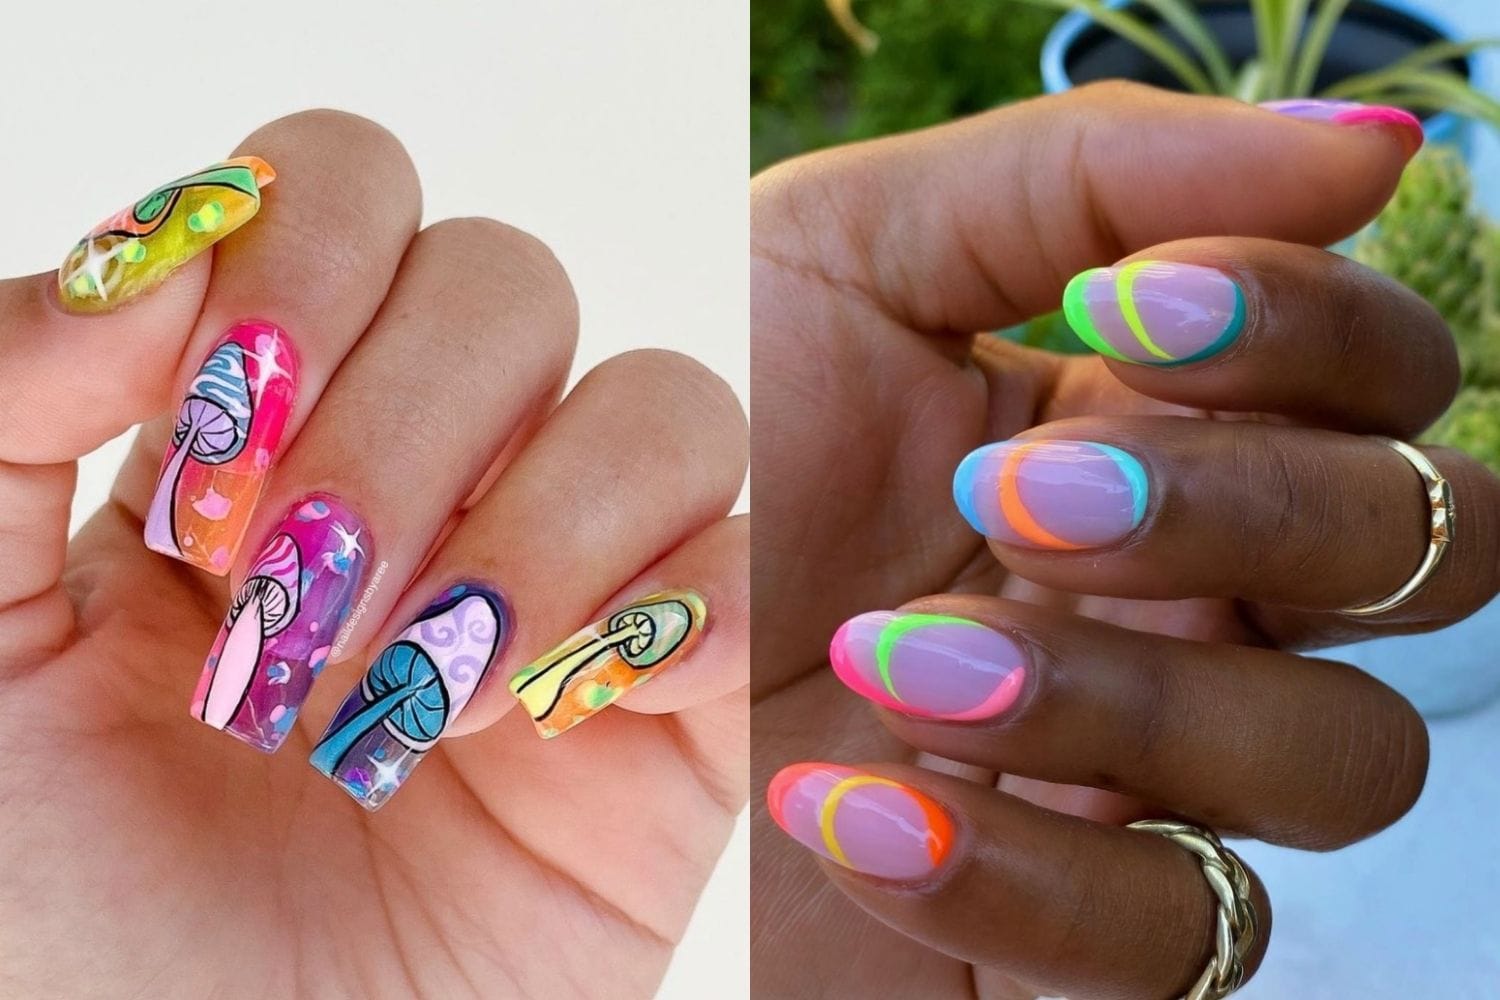 1. Neon Bright Long Nail Designs - wide 6